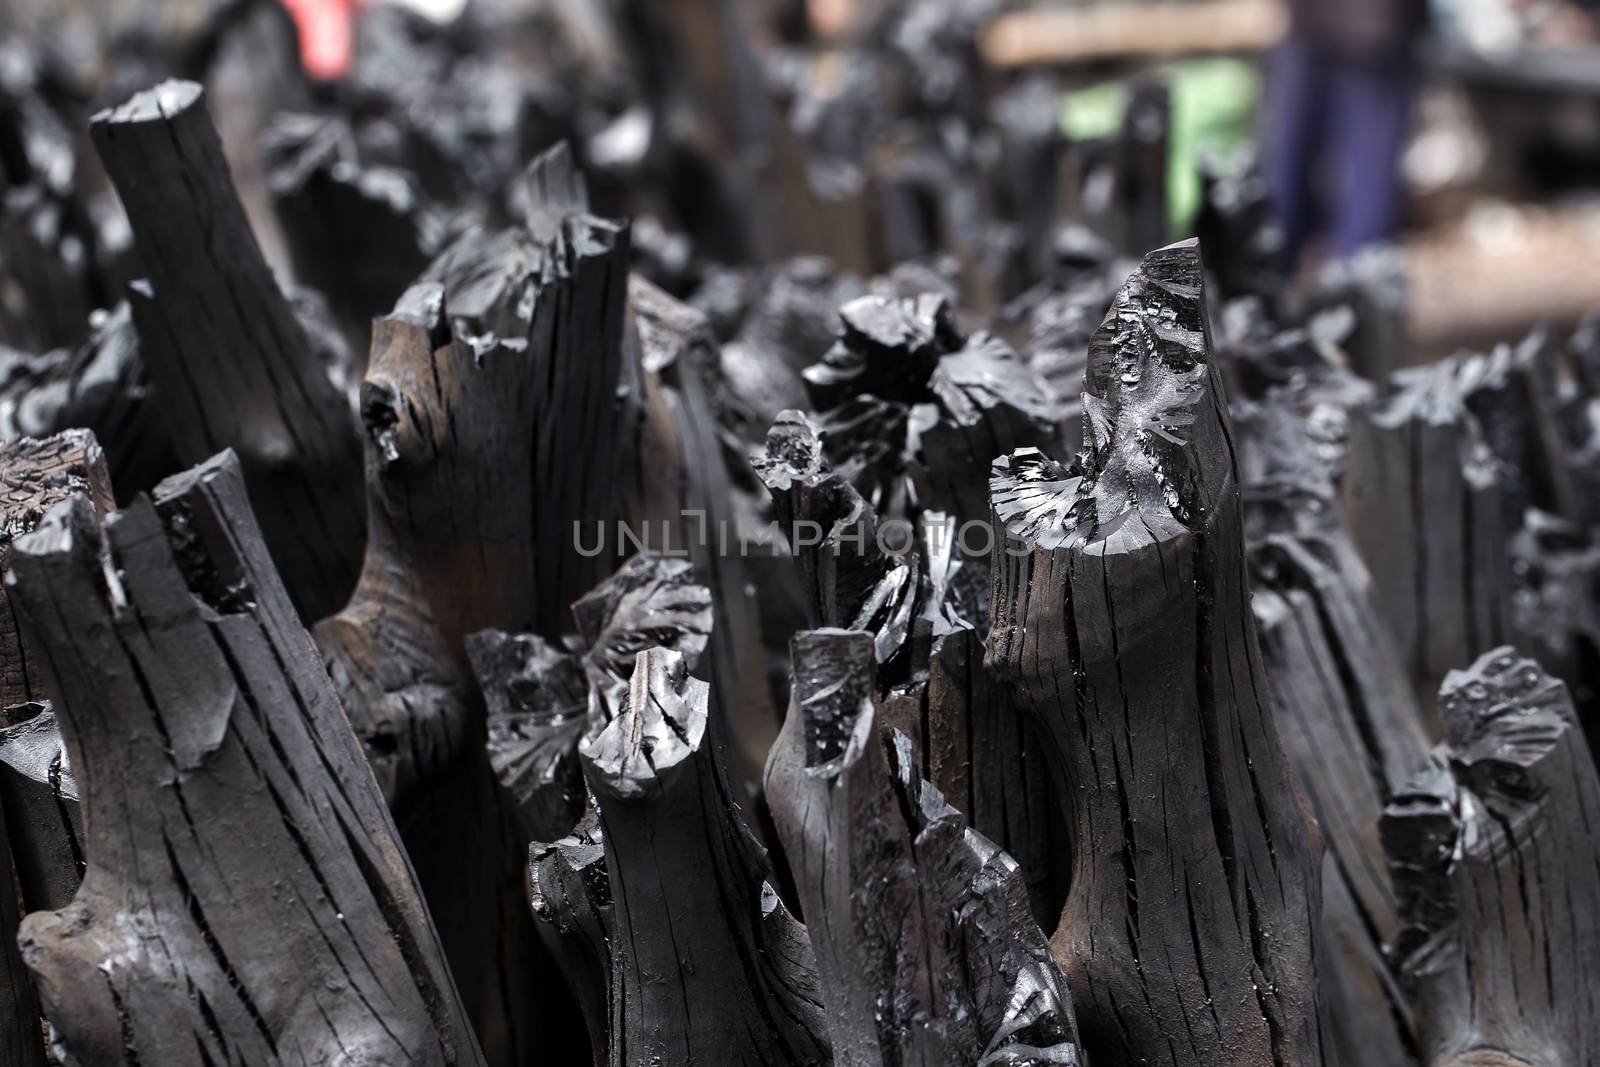 Natural wood charcoal, traditional charcoal or hard wood charcoa by kaiskynet